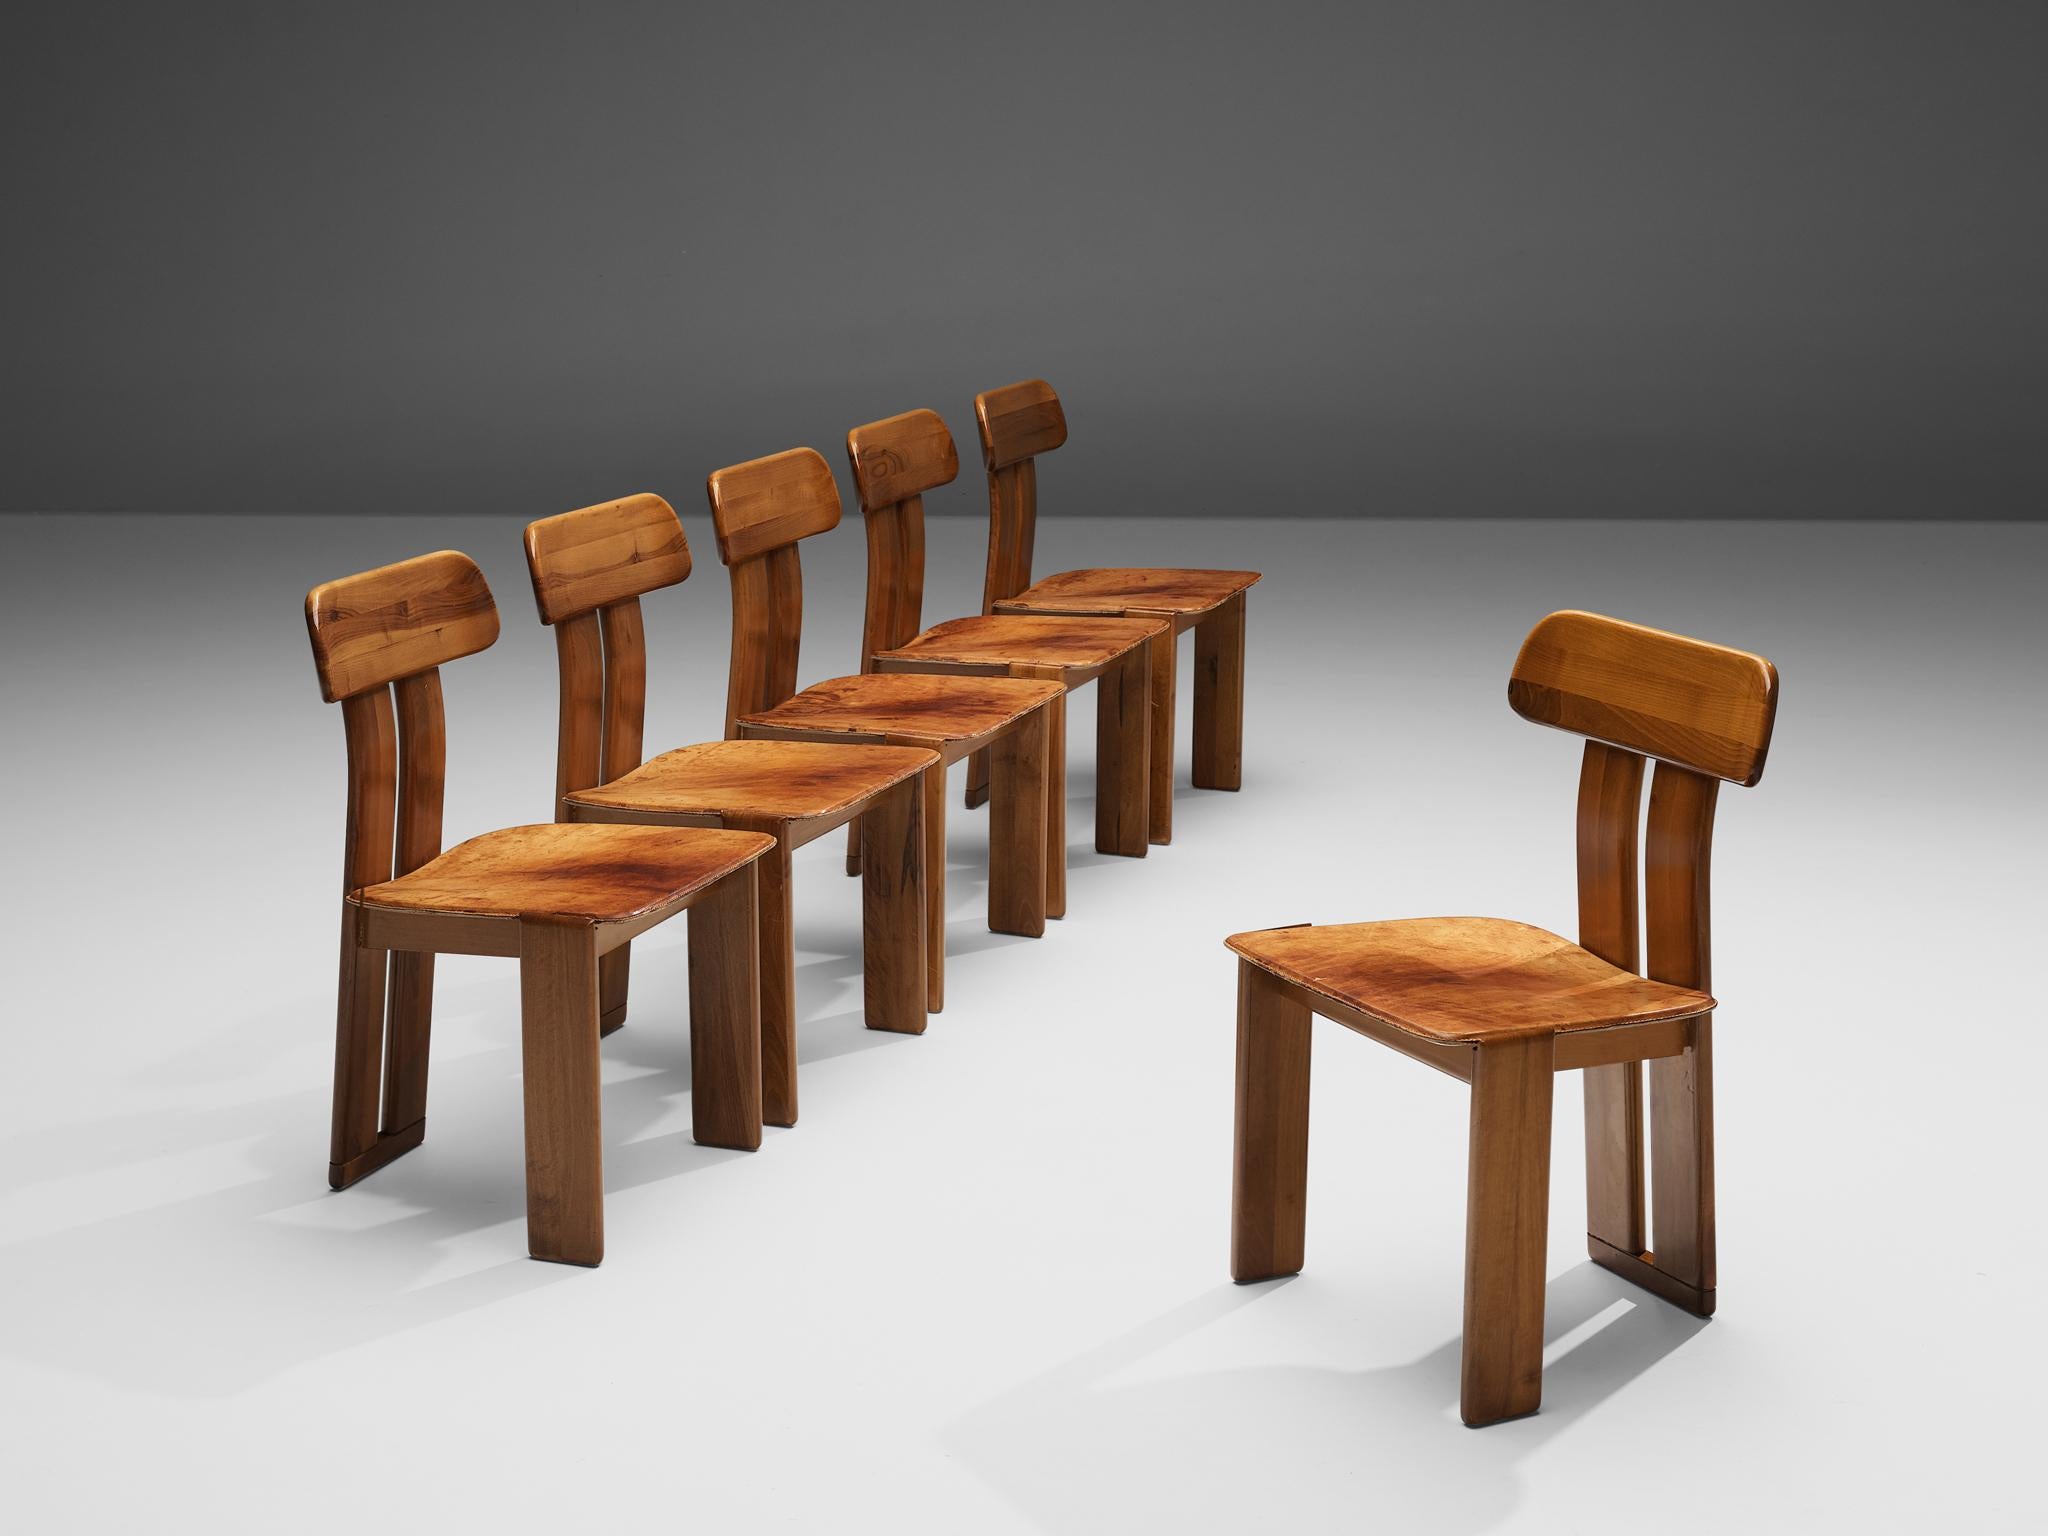 Sapporo for Mobil Girgi, set of six dining chairs, Italian walnut and patinated cognac leather, Italy, 1970s.

Set of six sculptural chairs that feature wonderful backrests, consisting of two vertical slats distanced from each other. At the bottom